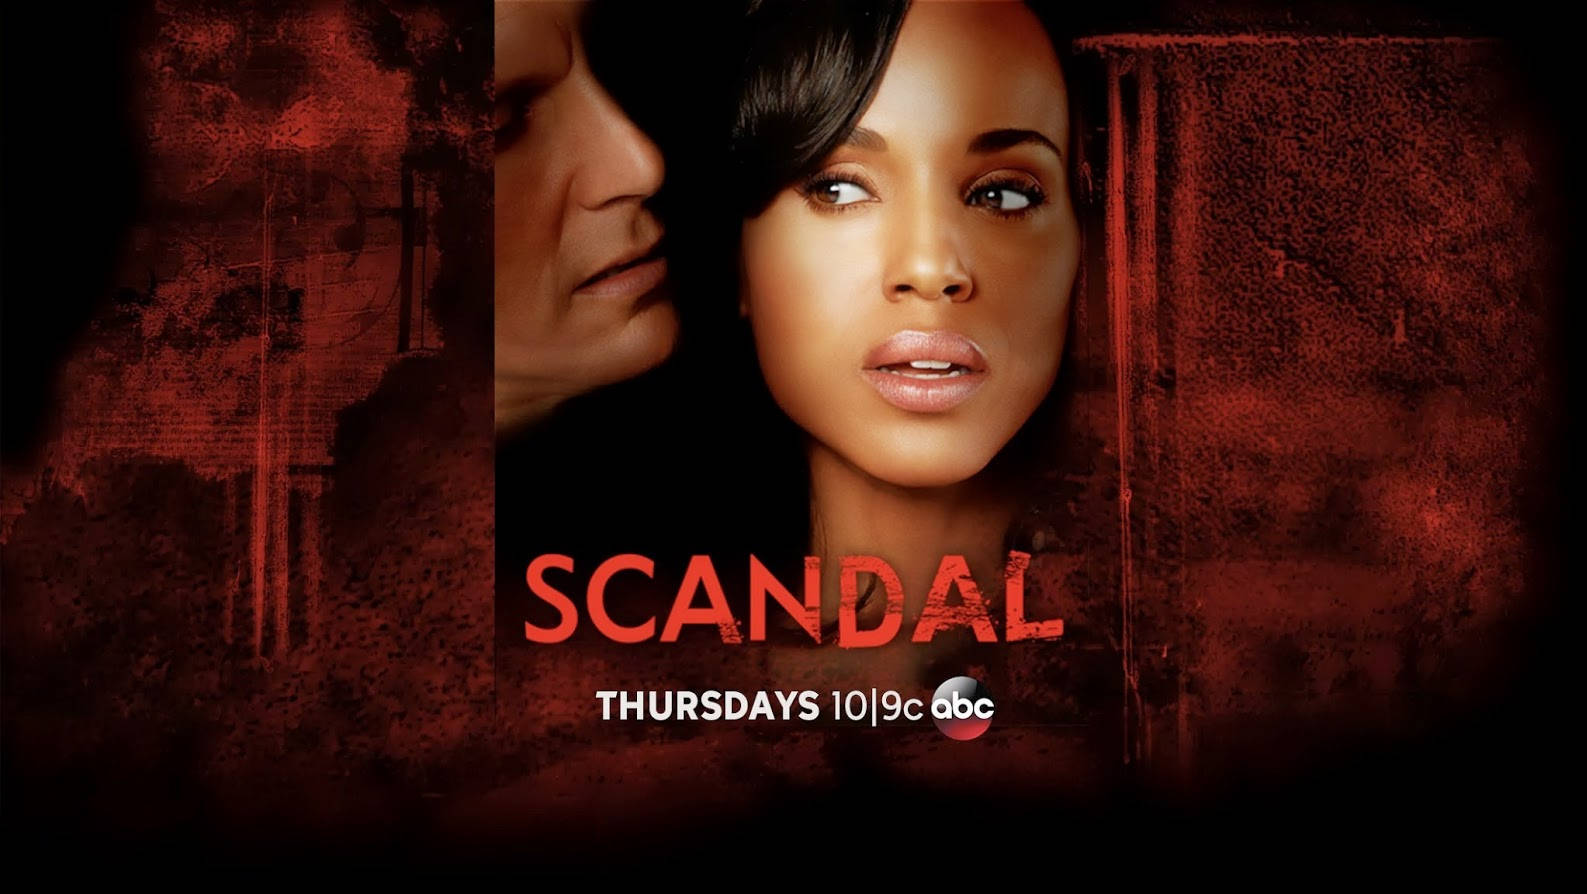 Olivia Pope And President Fitzgerald Grant In A Pivotal Moment In Scandal Wallpaper